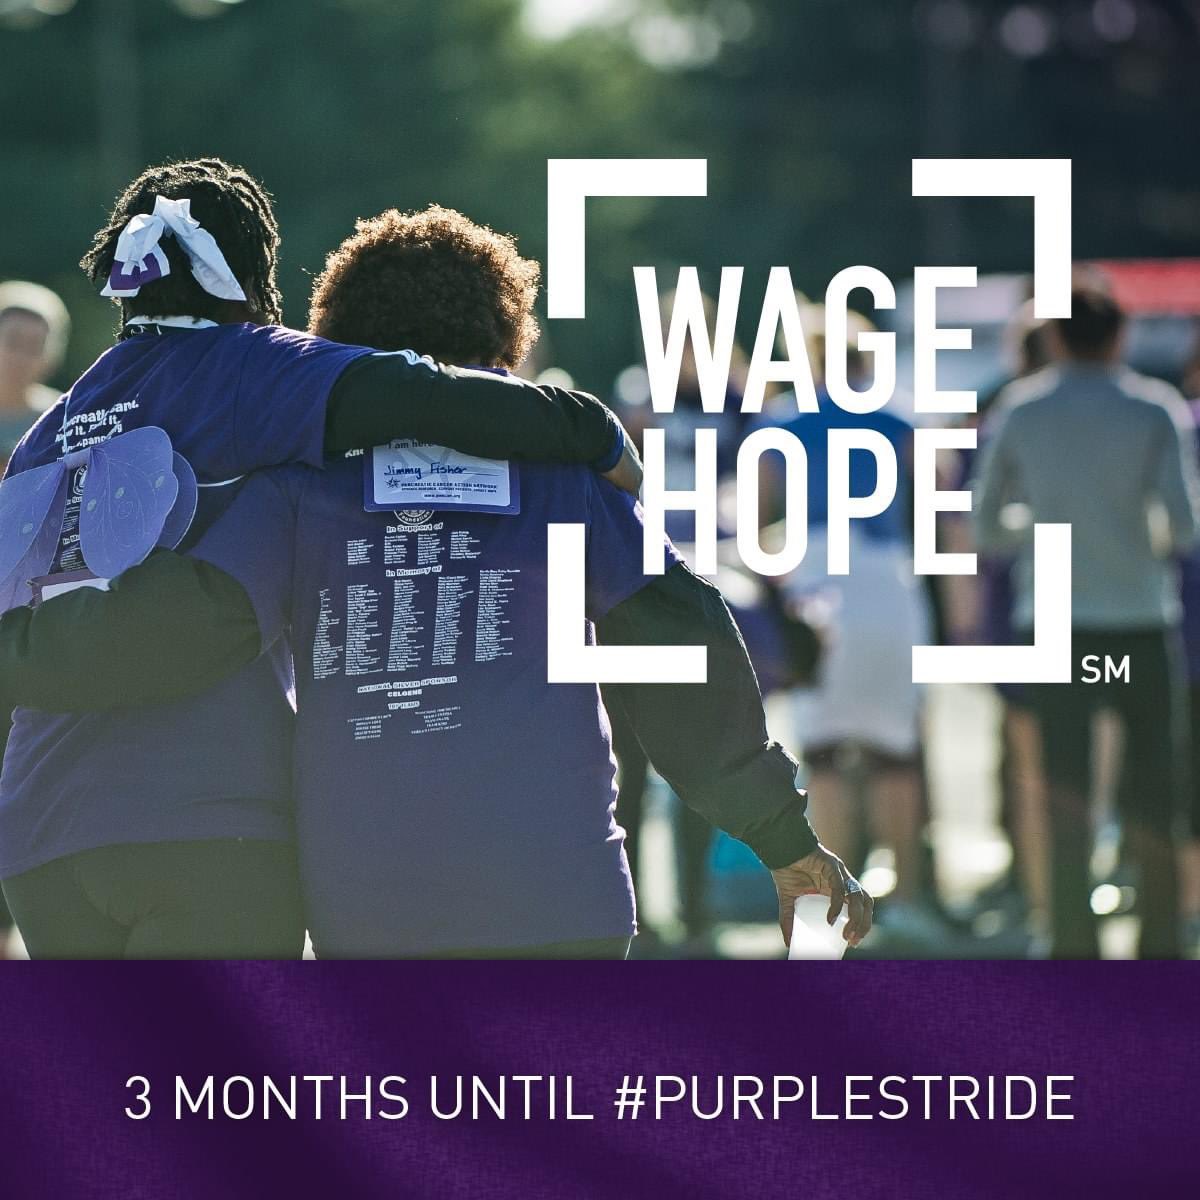 Do you believe we are just three months away from #PurpleStride New Jersey? Now is the time to start or restart your team! Go to purplestride.org/nj to sign up for FREE for the April 27th event in Parsippany! @pancan